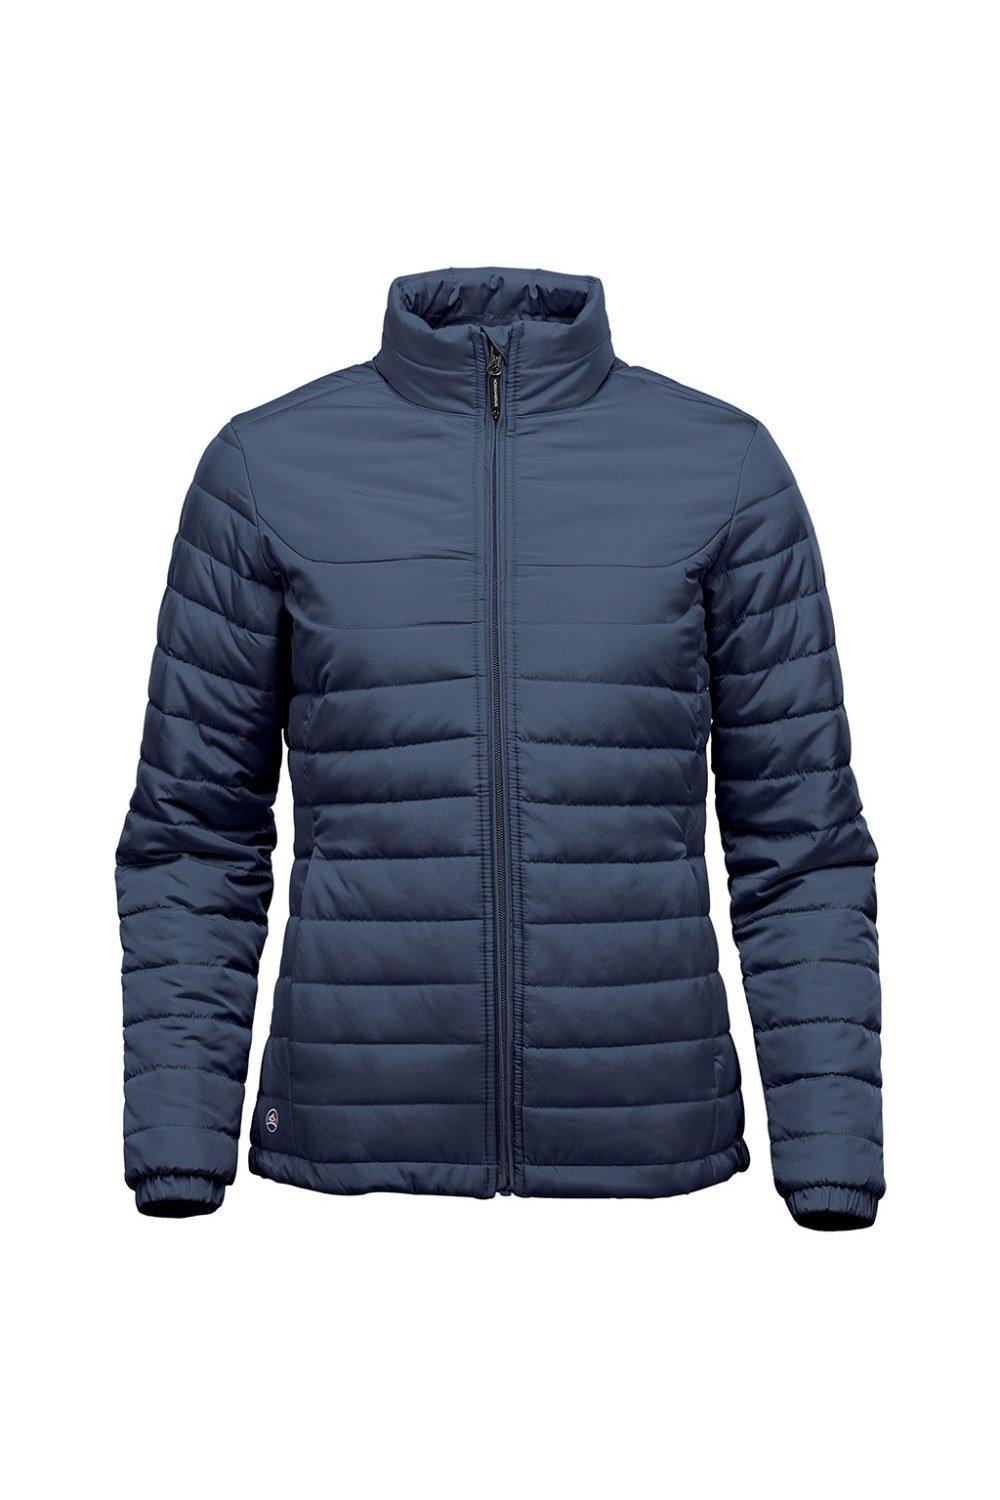 Stormtech Women's Nautilus Quilted Padded Jacket|Size: XL|navy